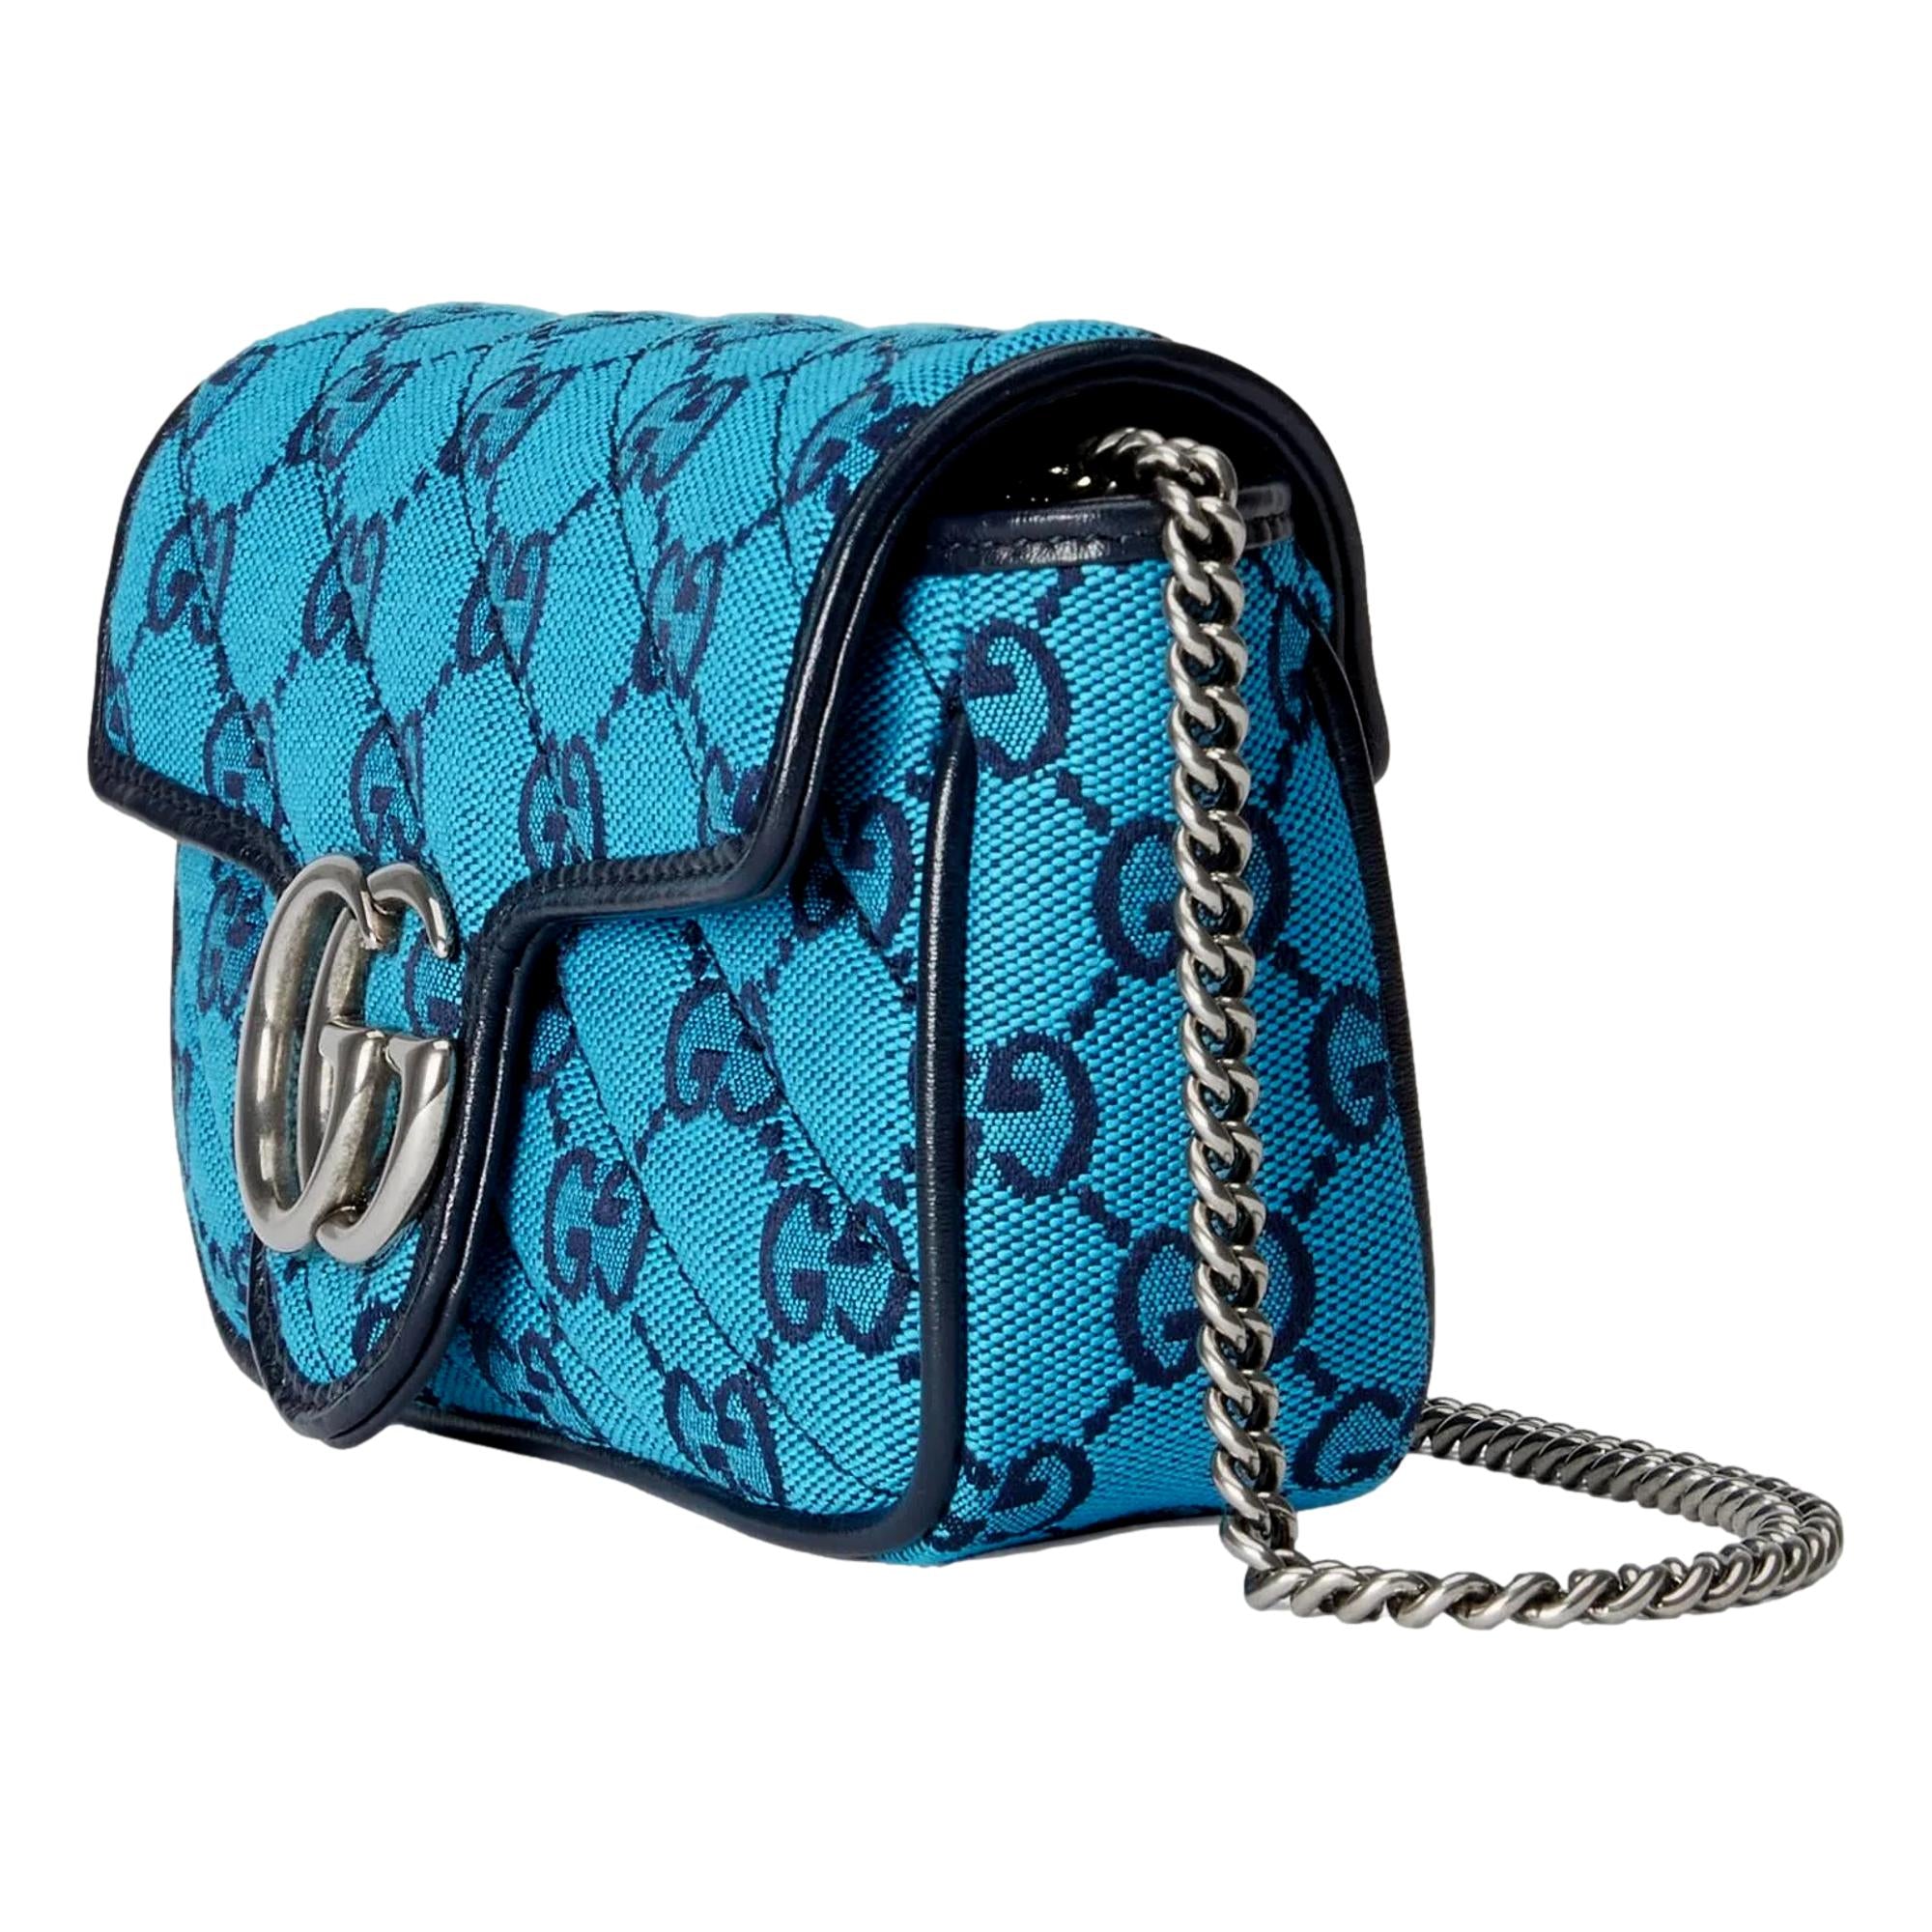 Gucci Flap Marmont Matelasse Blue Printed Canvas Shoulder Bag 443497 at_Queen_Bee_of_Beverly_Hills